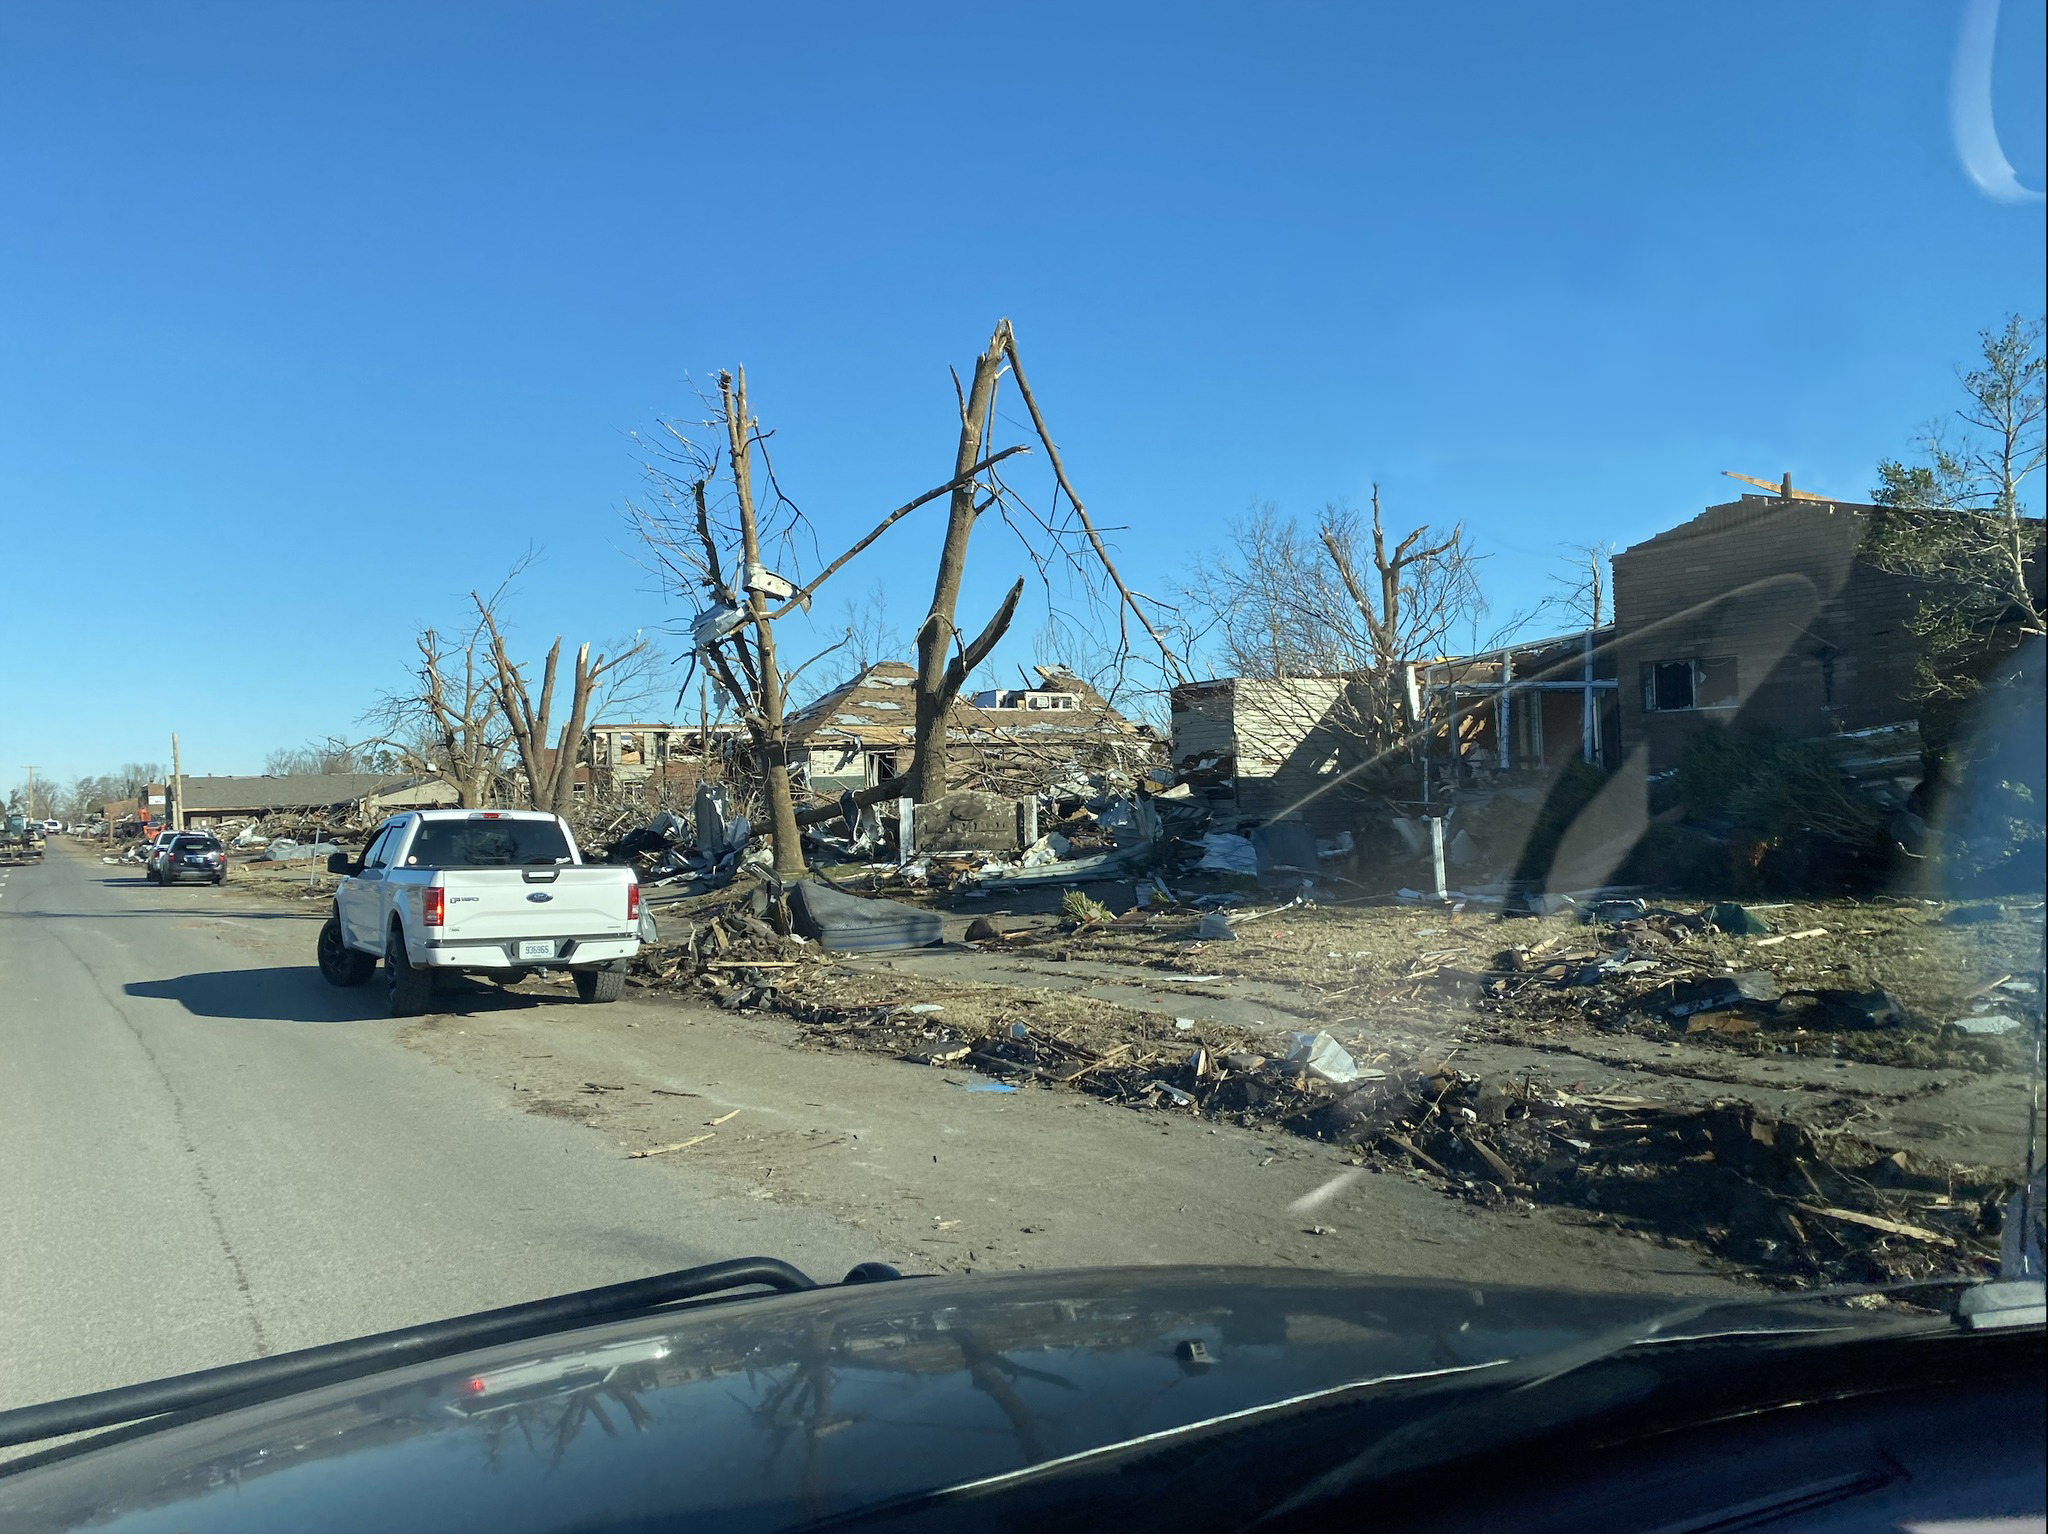 The Kentucky-Tennessee Conference shared this photo of just a small portion of the destruction caused when tornadoes ripped through several U.S. states on Dec. 10-11, 2021, with much of worst damage evident in Kentucky. Photo from the Kentucky-Tennessee Conference Facebook page.